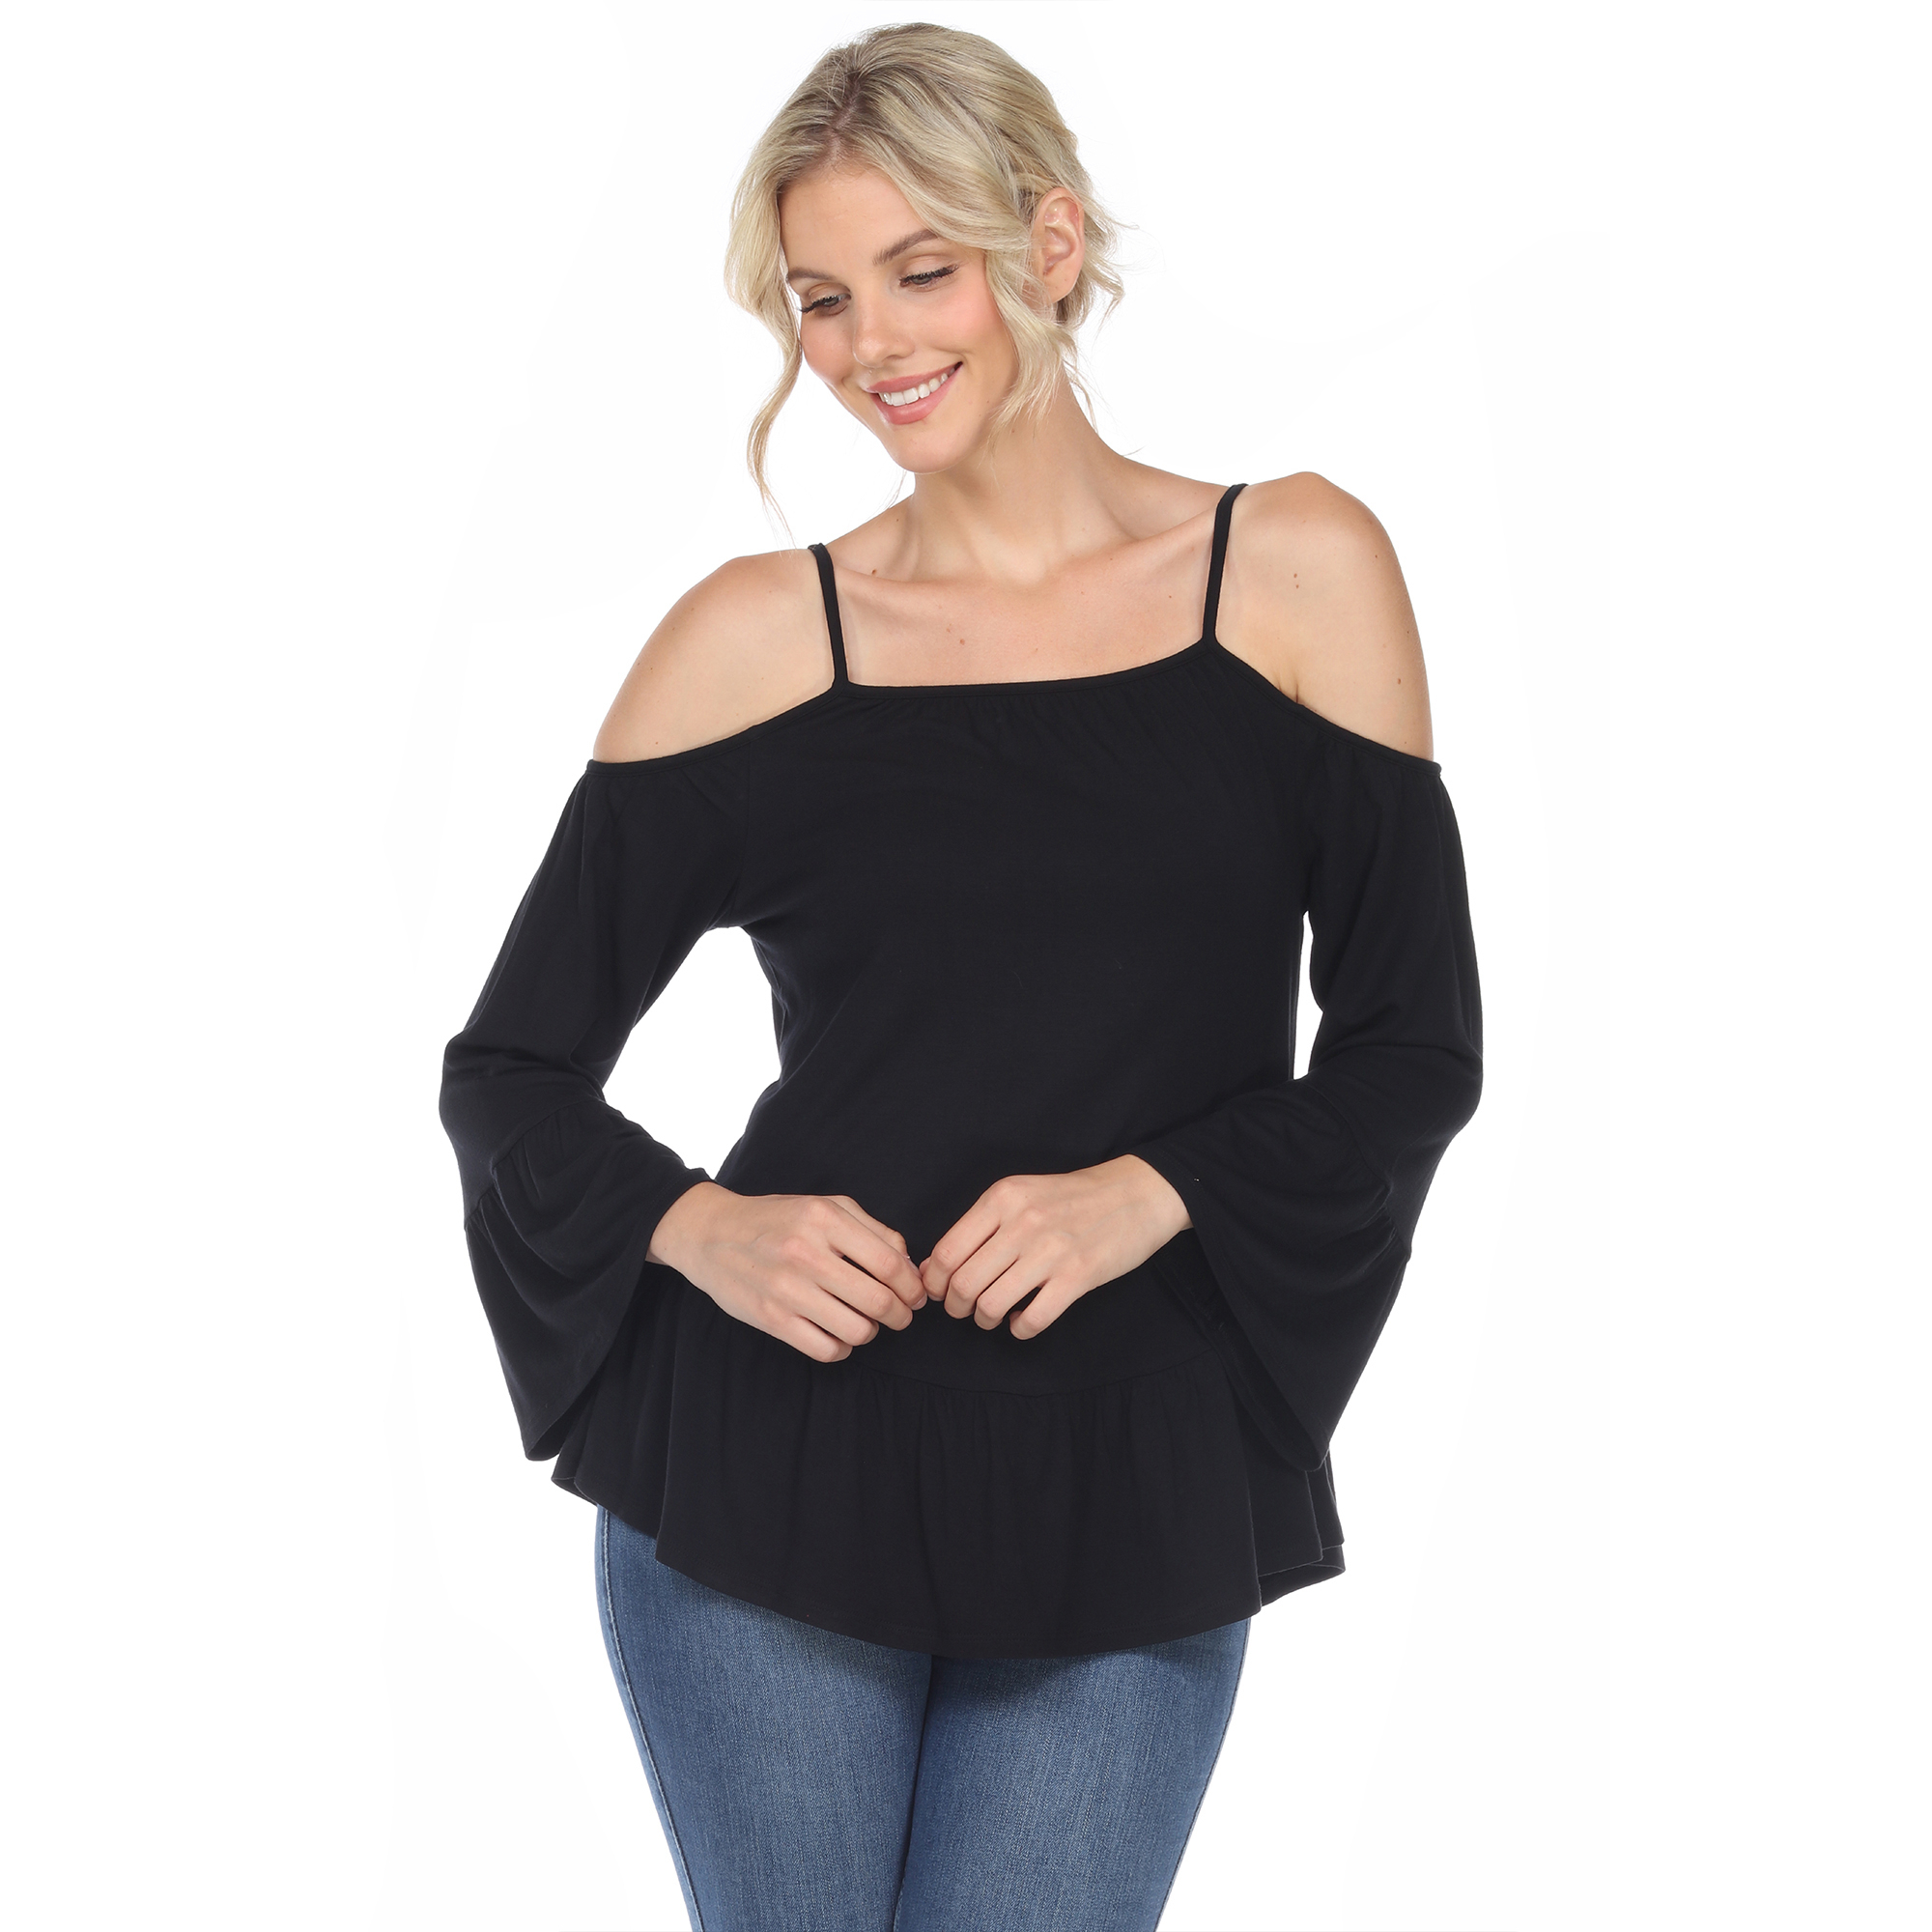 White Mark Women's Cold Shoulder Ruffle Sleeve Top - Black, X-Large